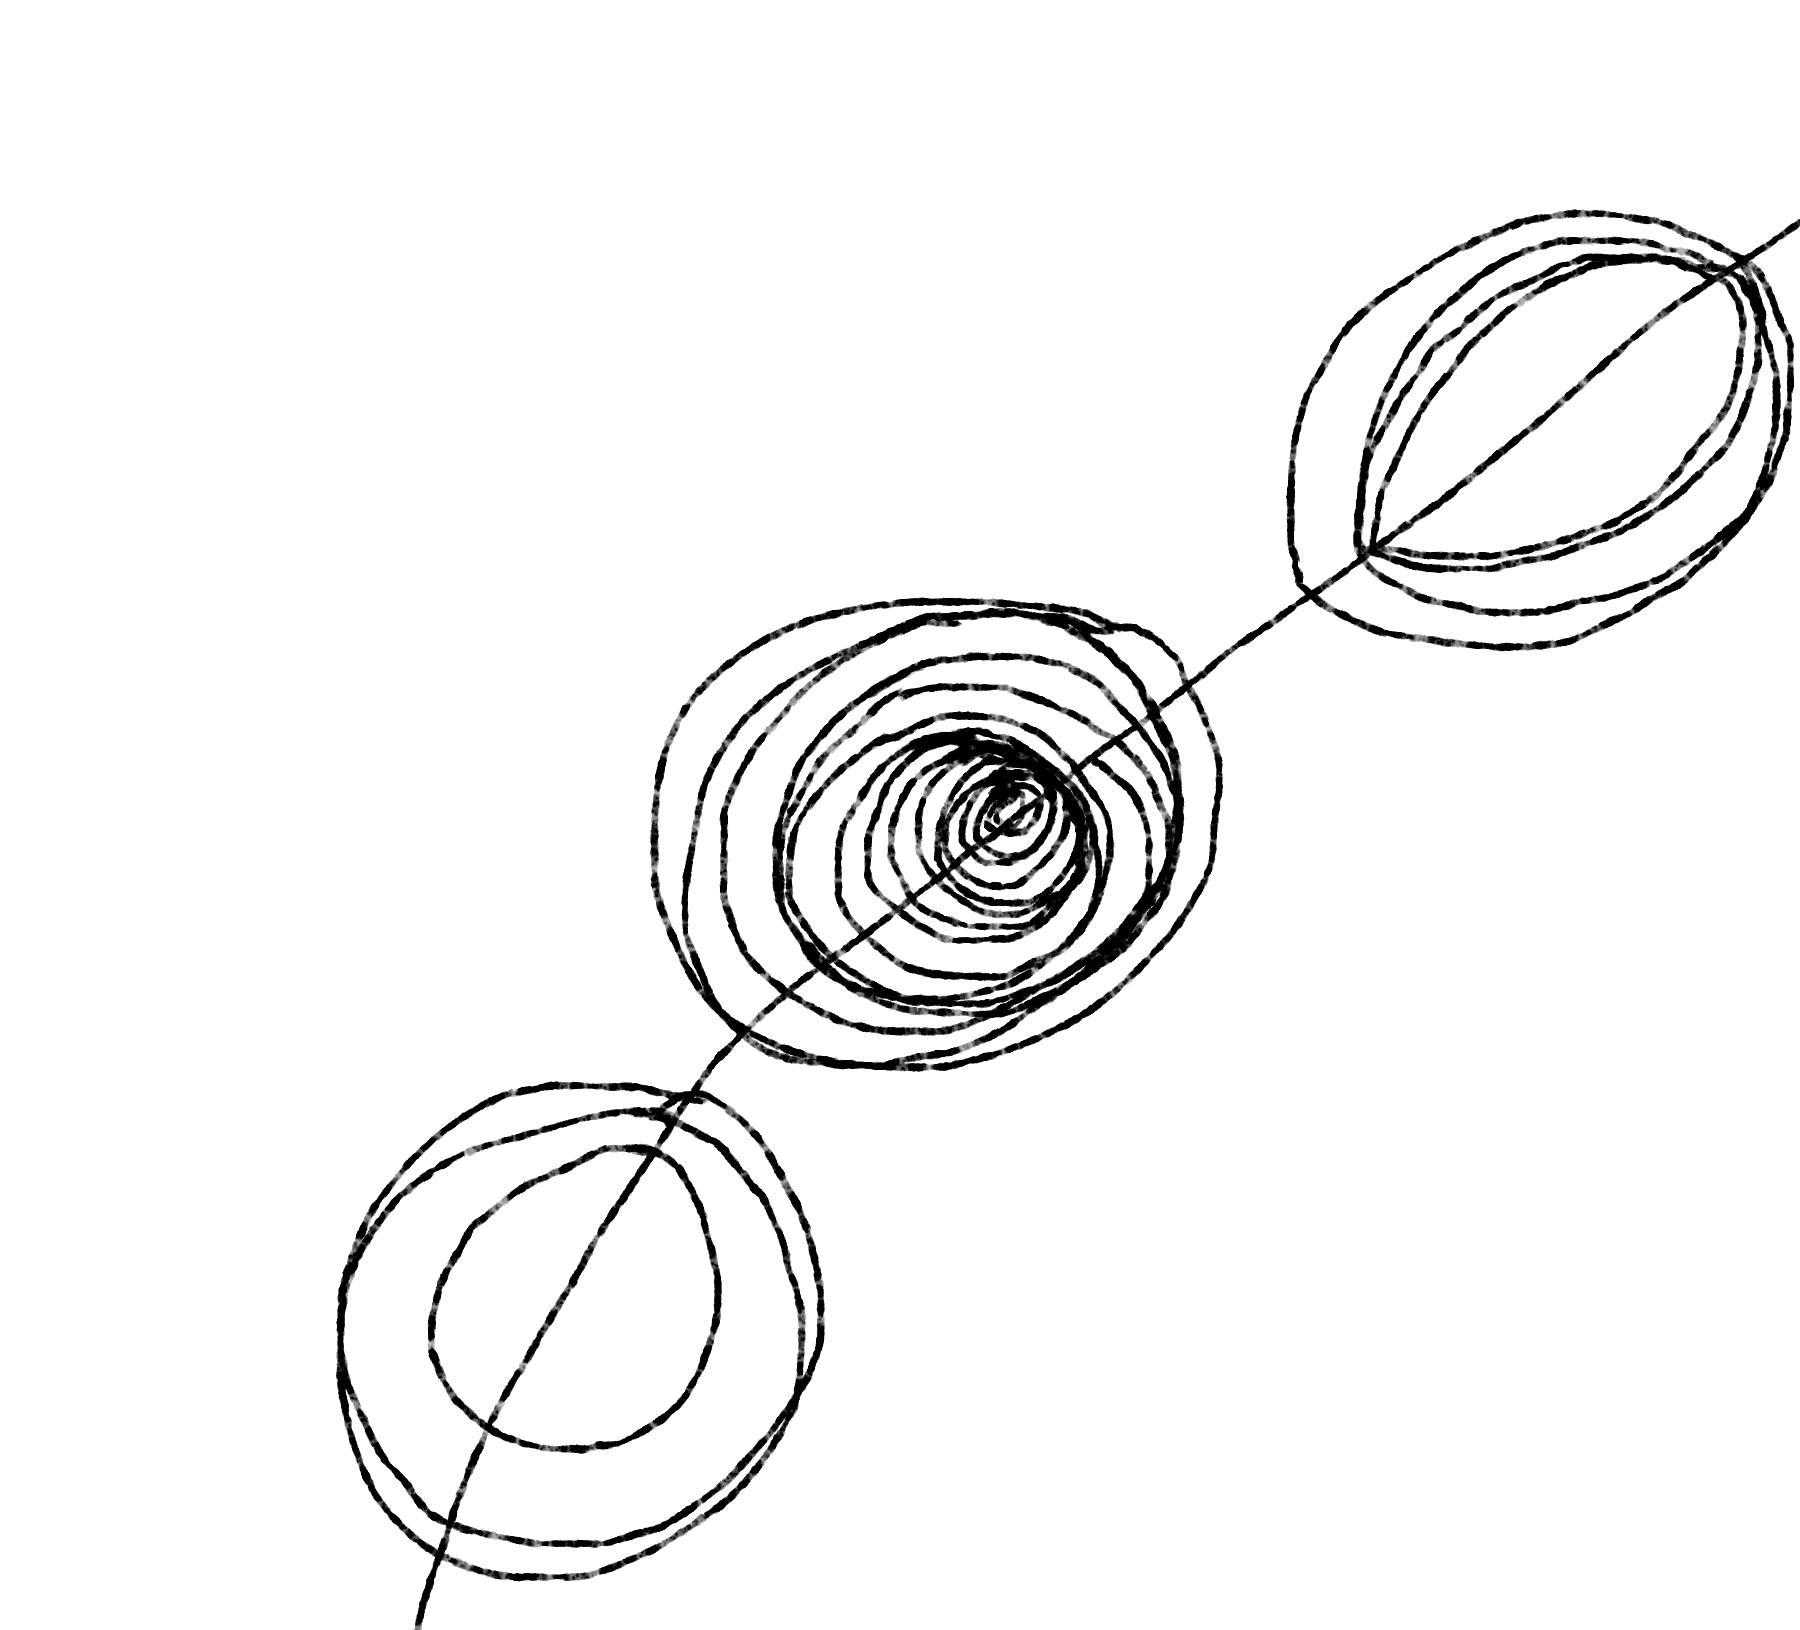 illustration of connected circles